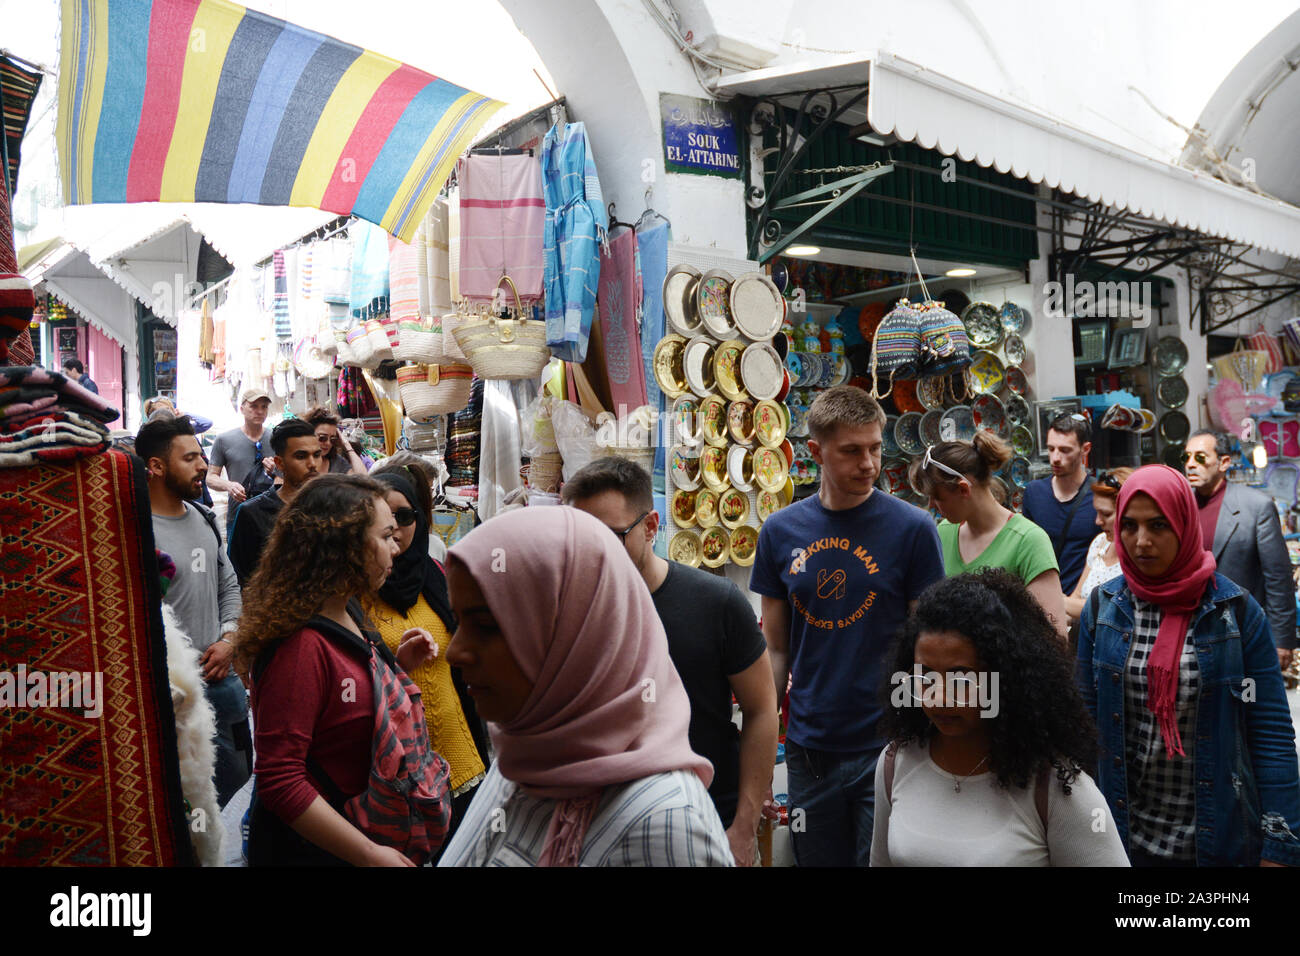 A crowd of foreign tourists walk past souvenir shops in the souk of the Kasbah district of the Medina (old city) of Tunis, Tunisia. Stock Photo